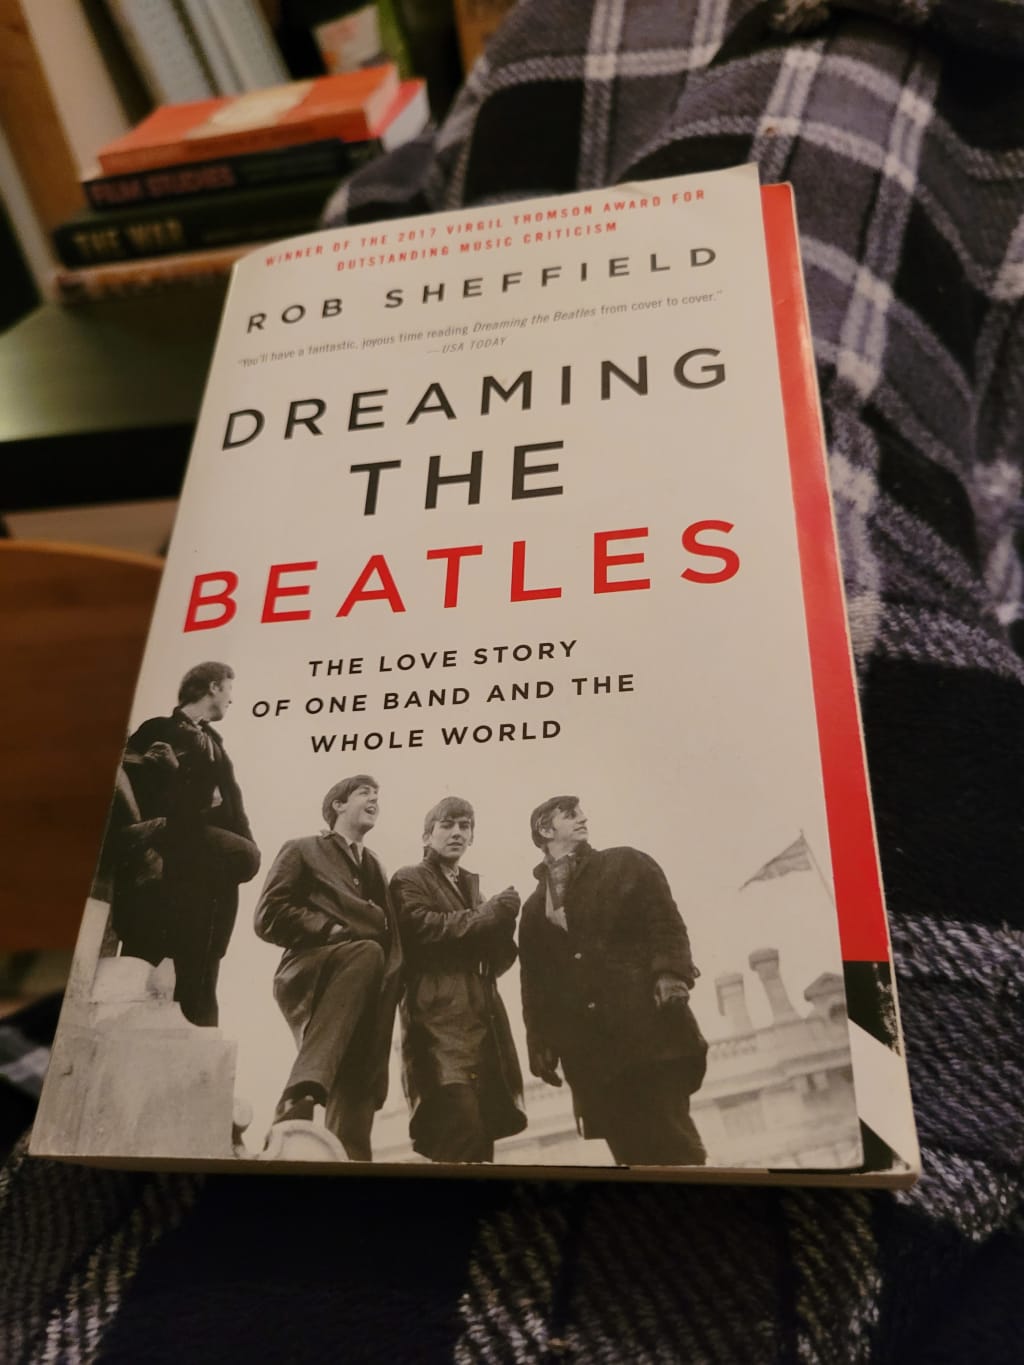 A Review of Rob Sheffield’s “Dreaming the Beatles”